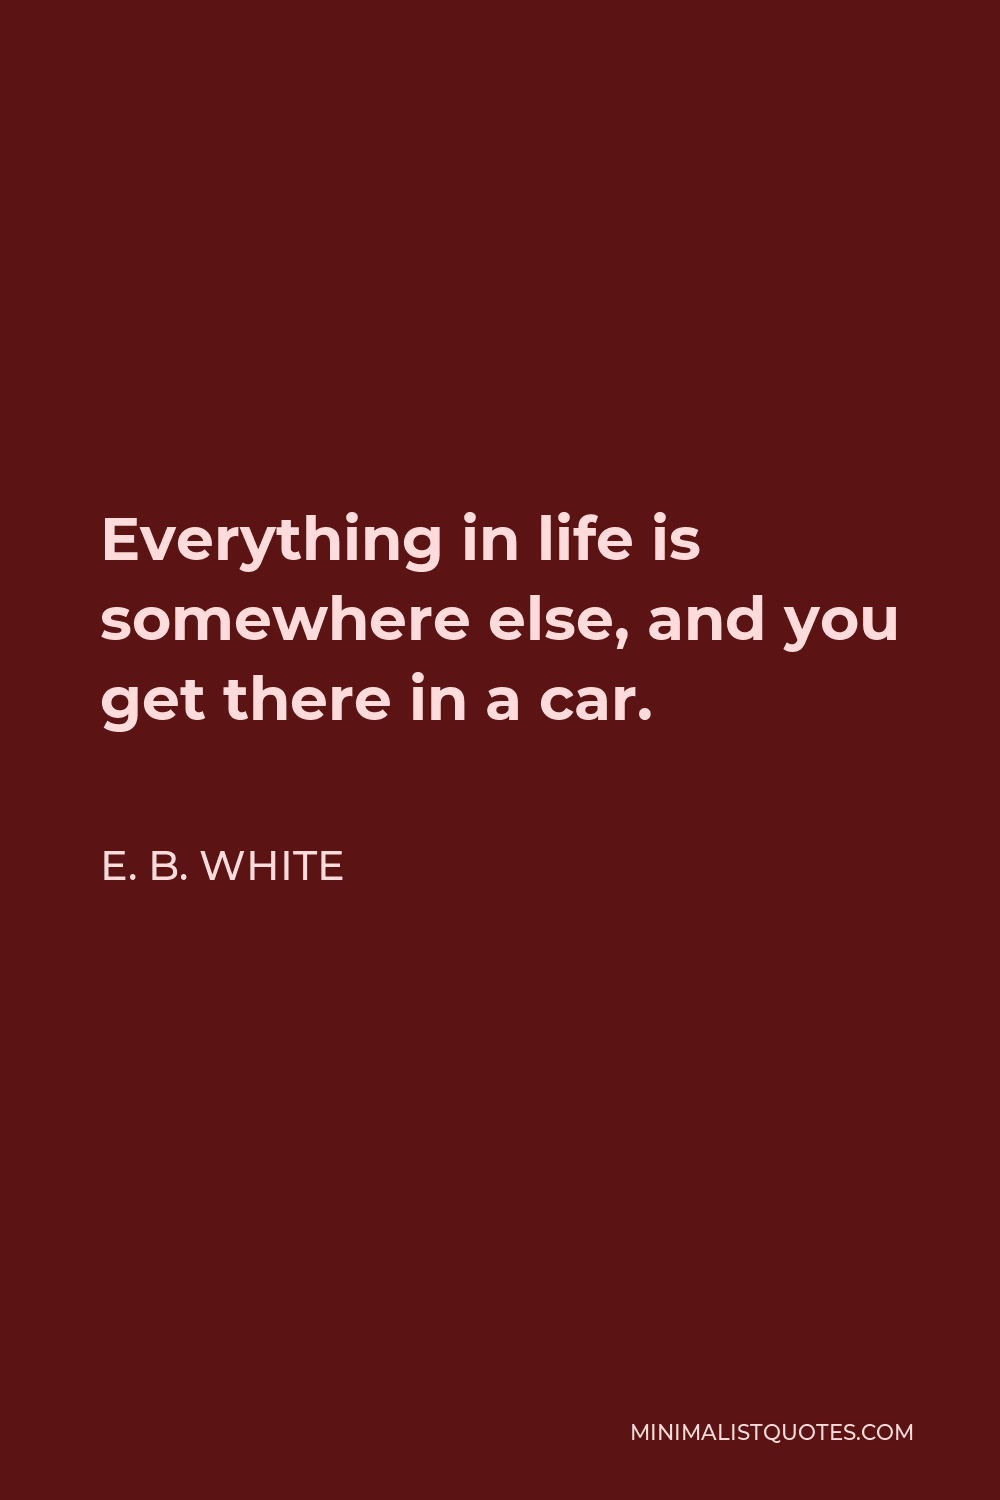 E. B. White Quote - Everything in life is somewhere else, and you get there in a car.